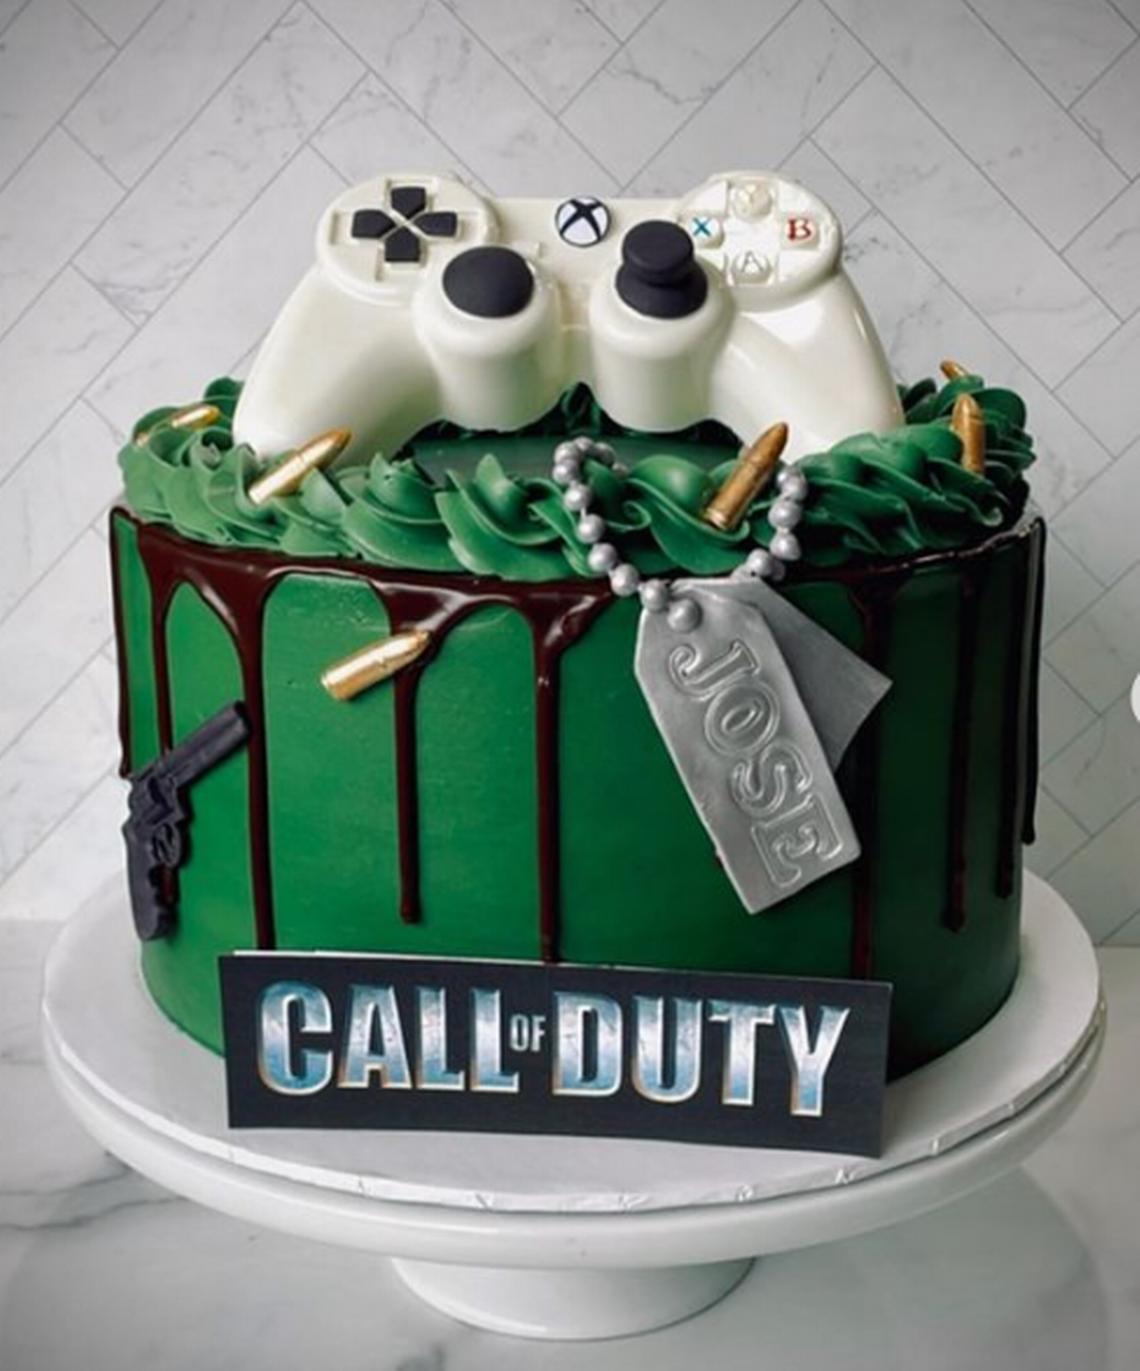 Call of Duty themed coconut cake from Simply Sweetz LLC featuring a white chocolate Xbox controller. Courtesy: @simplysweetz_llc Instagram